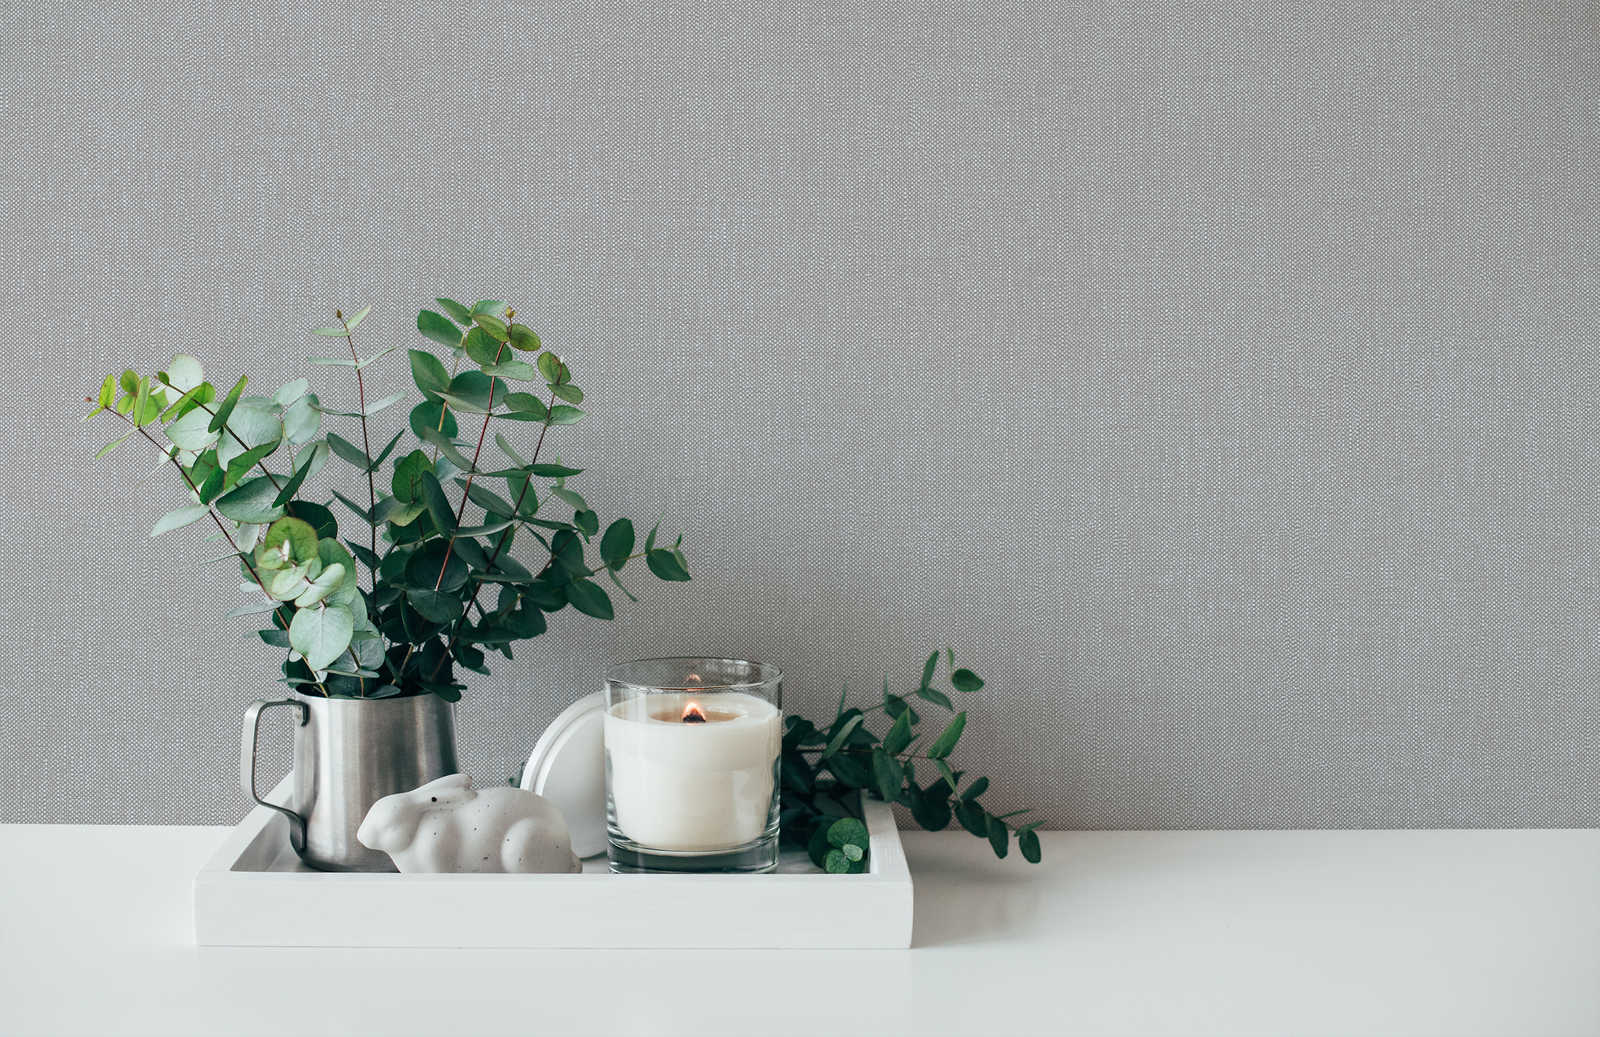             Plain wallpaper with fine structure - grey
        